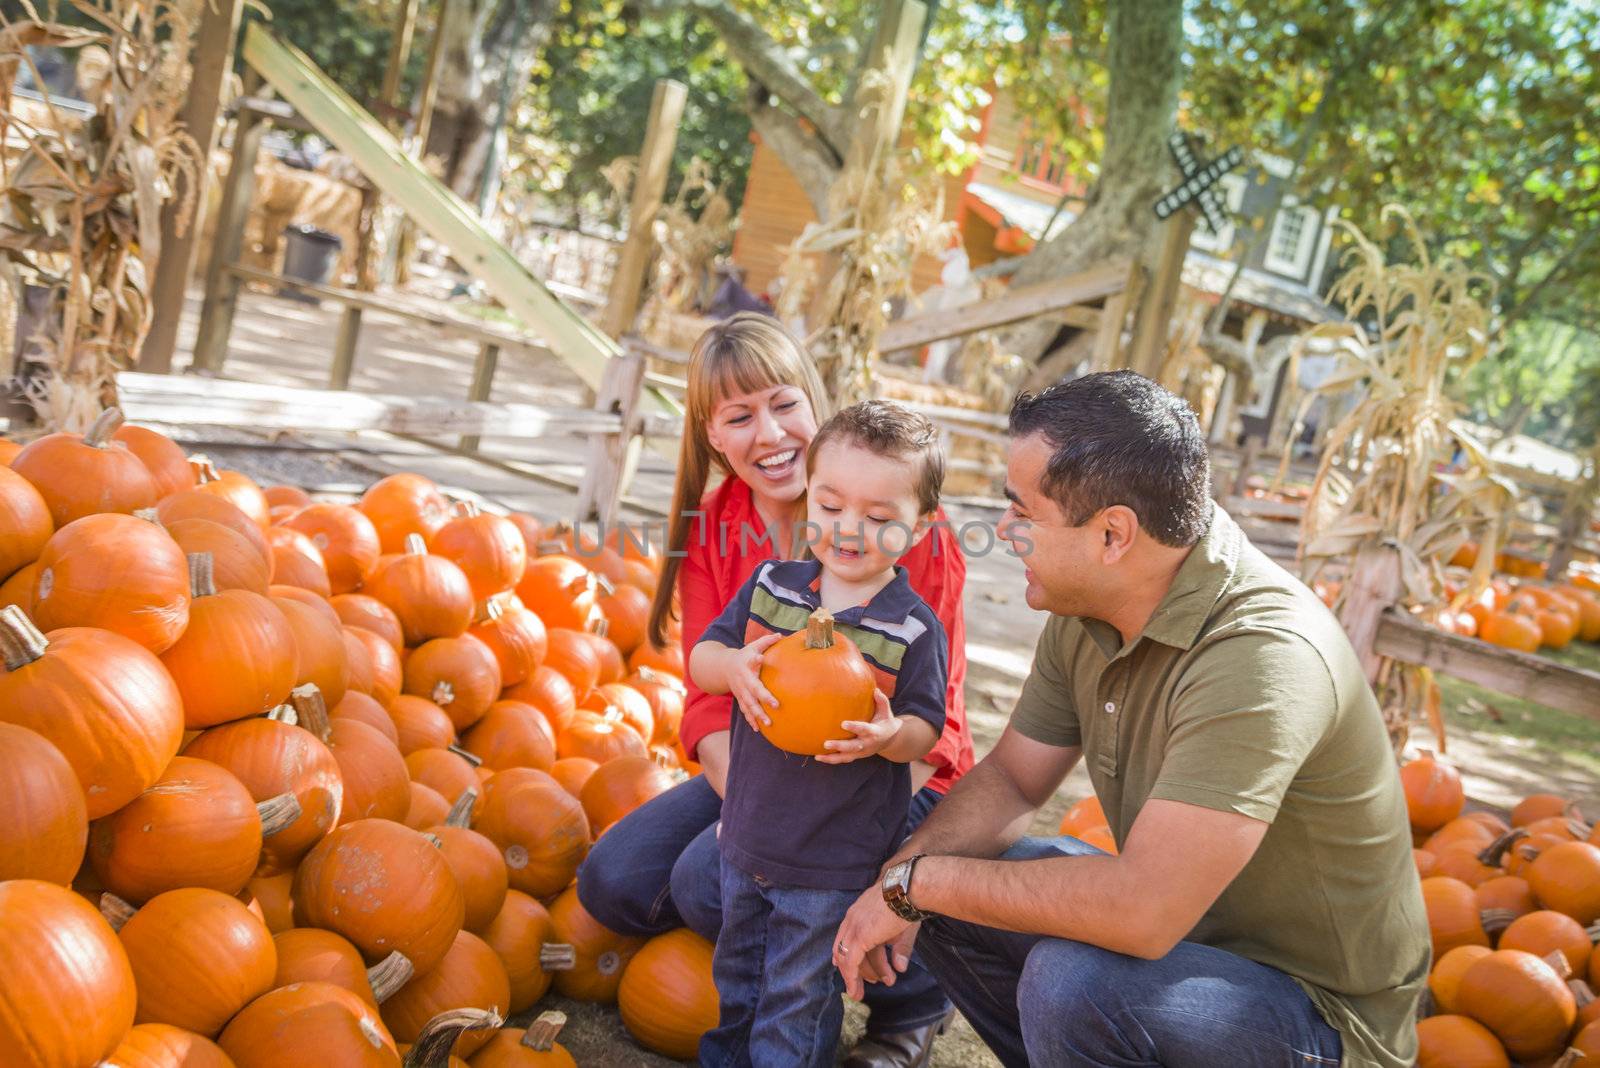 Happy Mixed Race Family at the Pumpkin Patch by Feverpitched